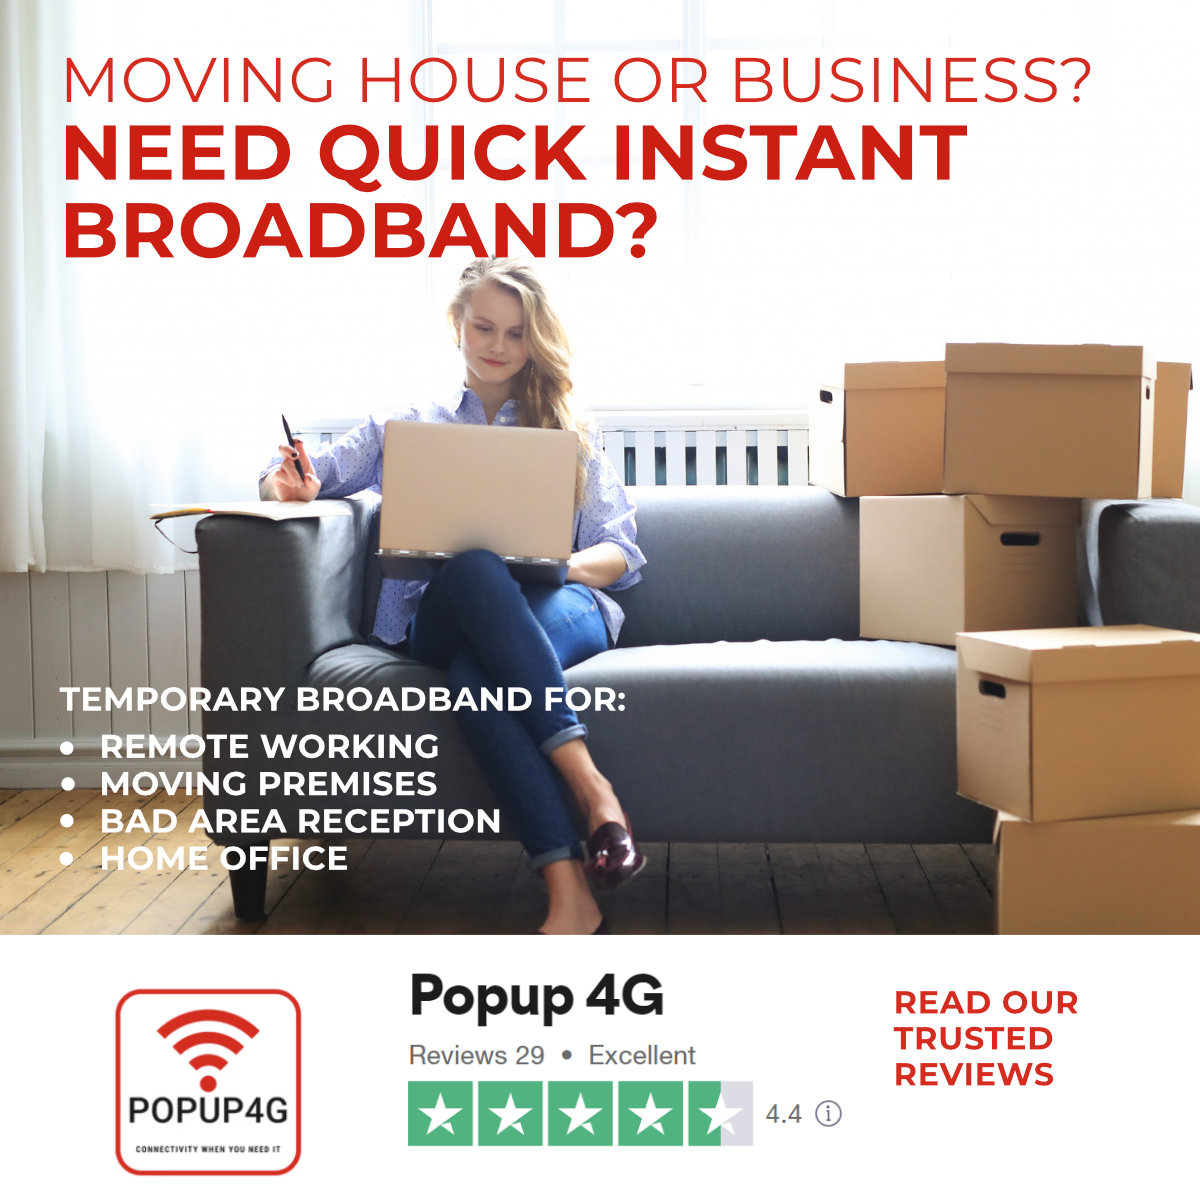 Moving home or business premises? Waiting for your broadband to be connected? Then check out our mobile broadband solutions for instant connection. 
Visit us at: popup4g.com
#workremotely
#broadband 
#temproarybroadband
#broadbandinternet